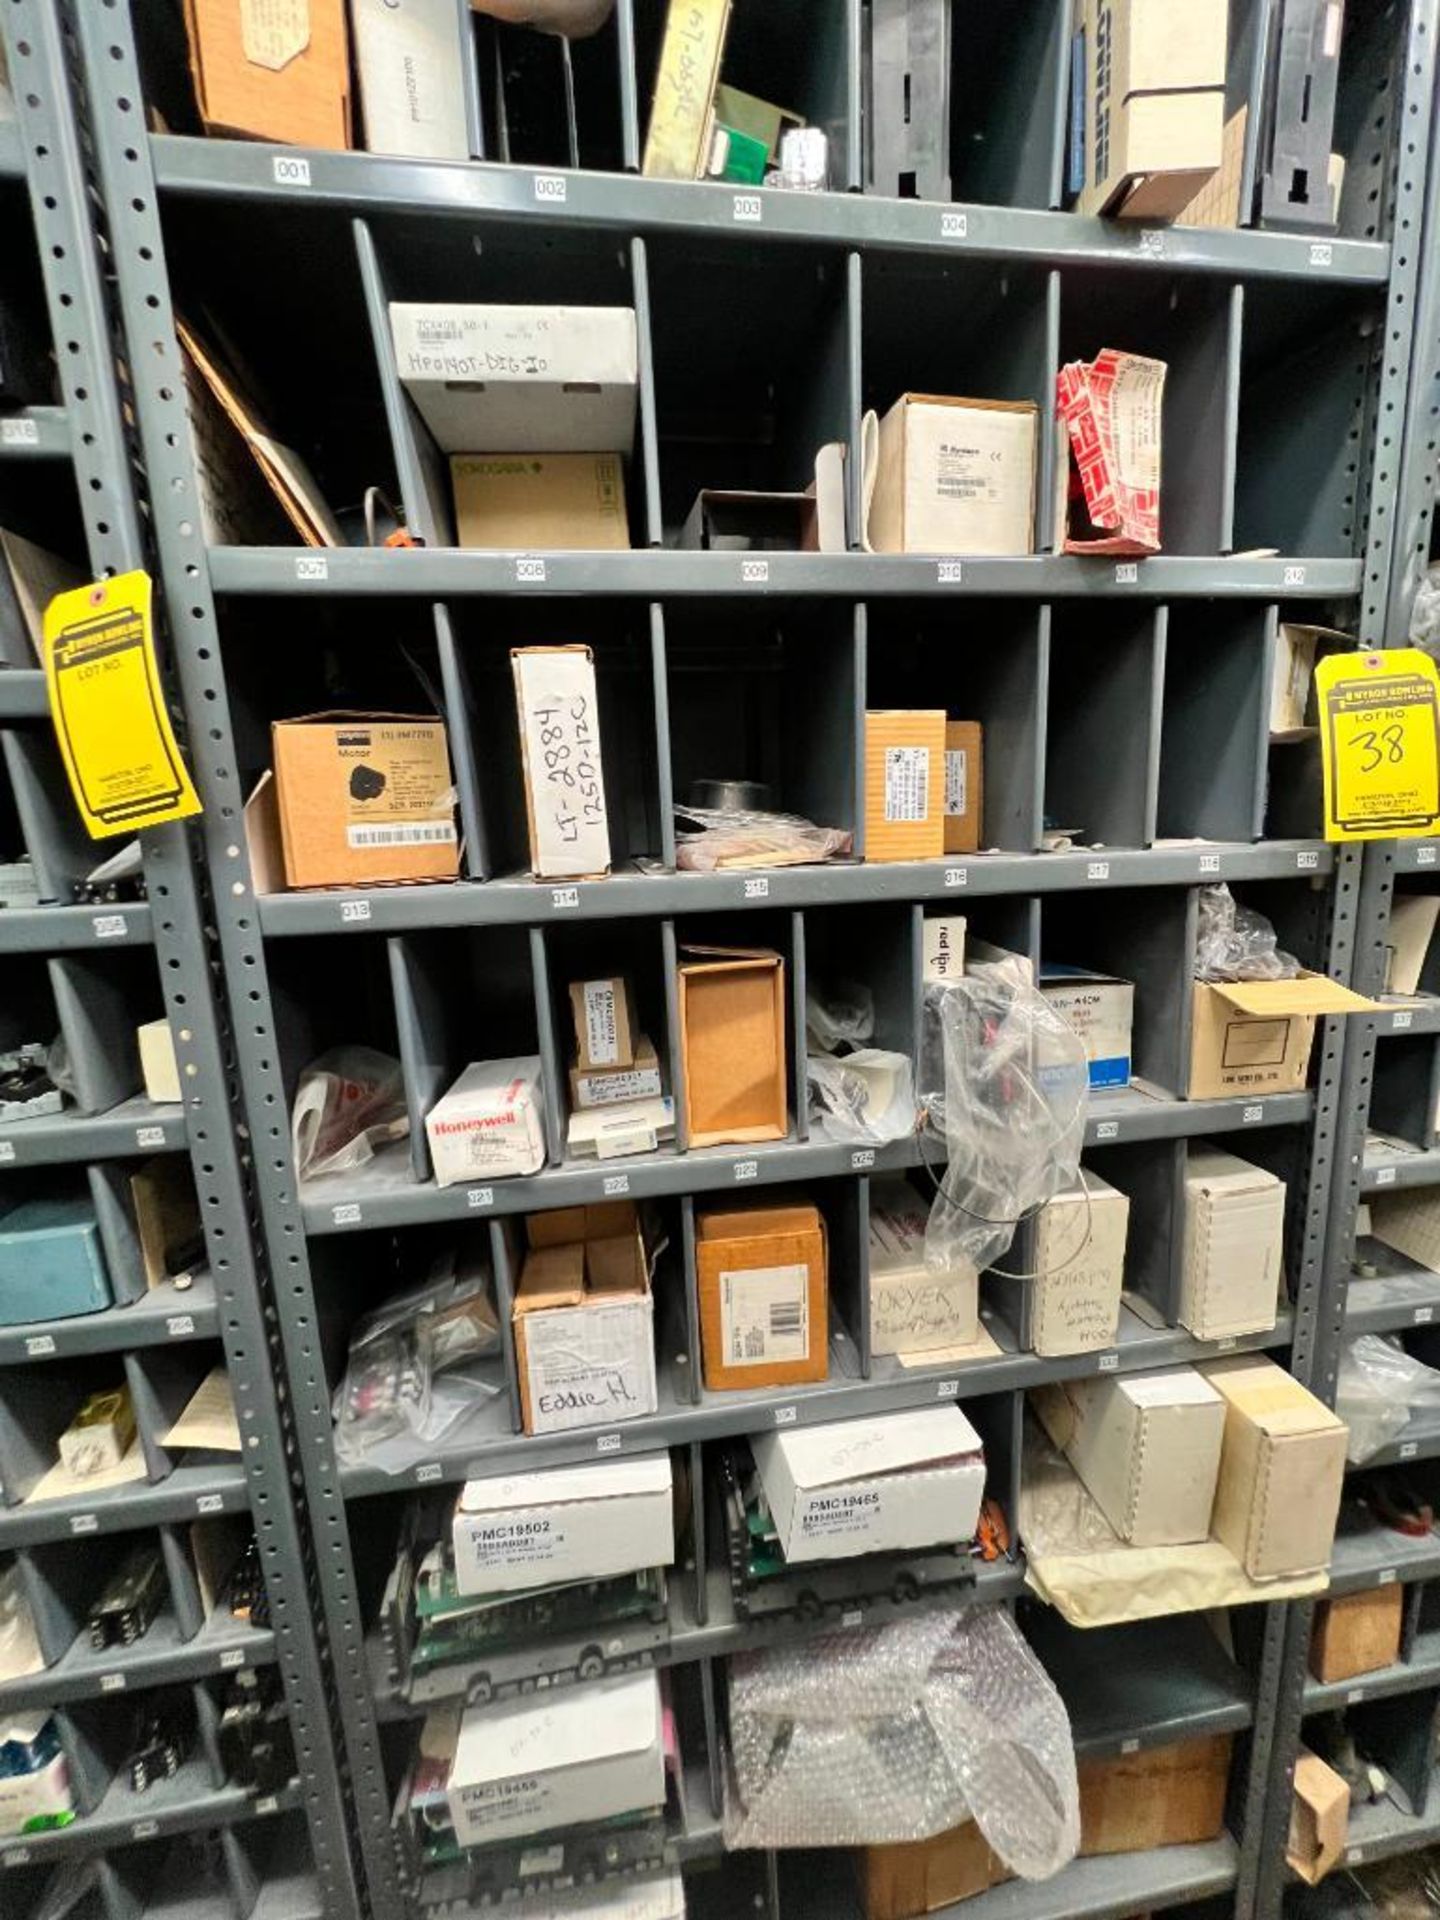 (28) Shelves of Assorted Parts, VERY LARGE LOT Consisting of MRO, Drives, Valves, PLC, Nuts, Bolts, - Image 43 of 67